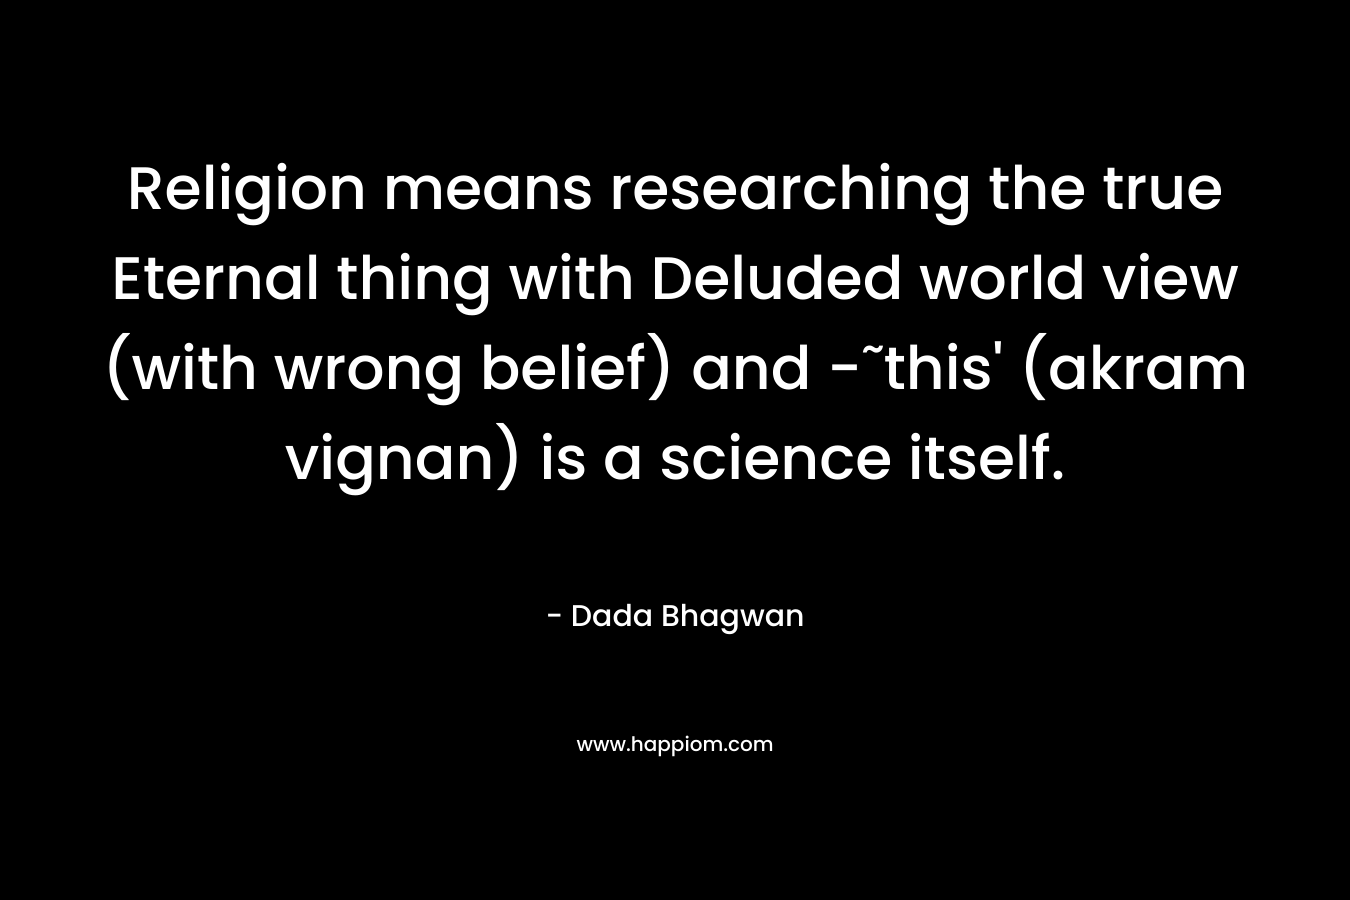 Religion means researching the true Eternal thing with Deluded world view (with wrong belief) and -˜this’ (akram vignan) is a science itself. – Dada Bhagwan